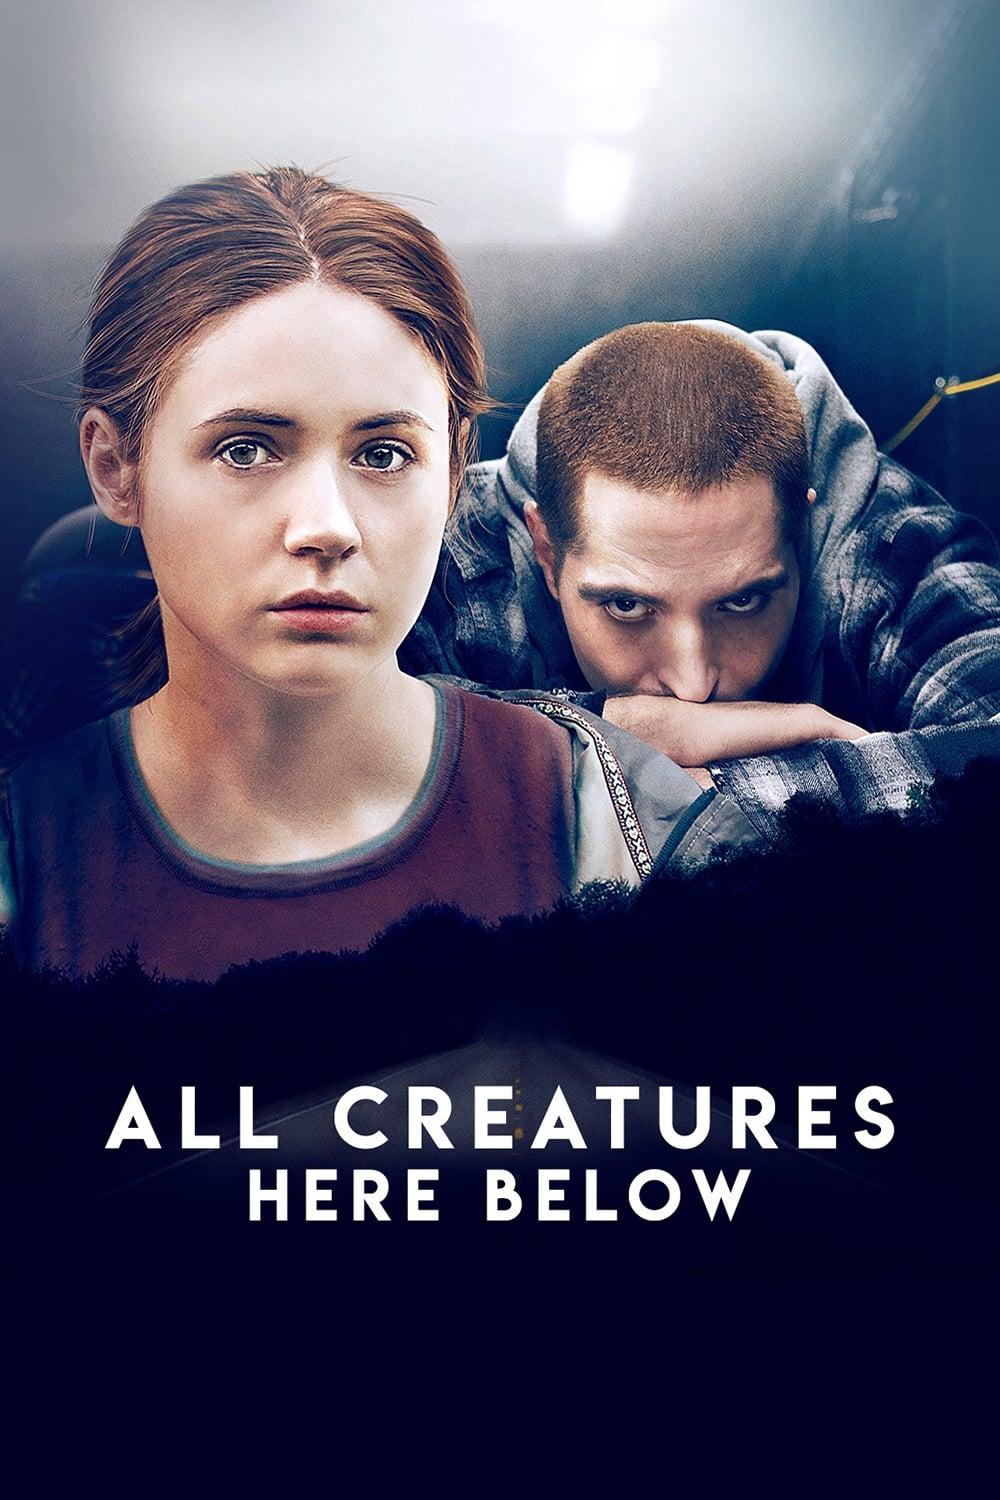 All Creatures Here Below poster